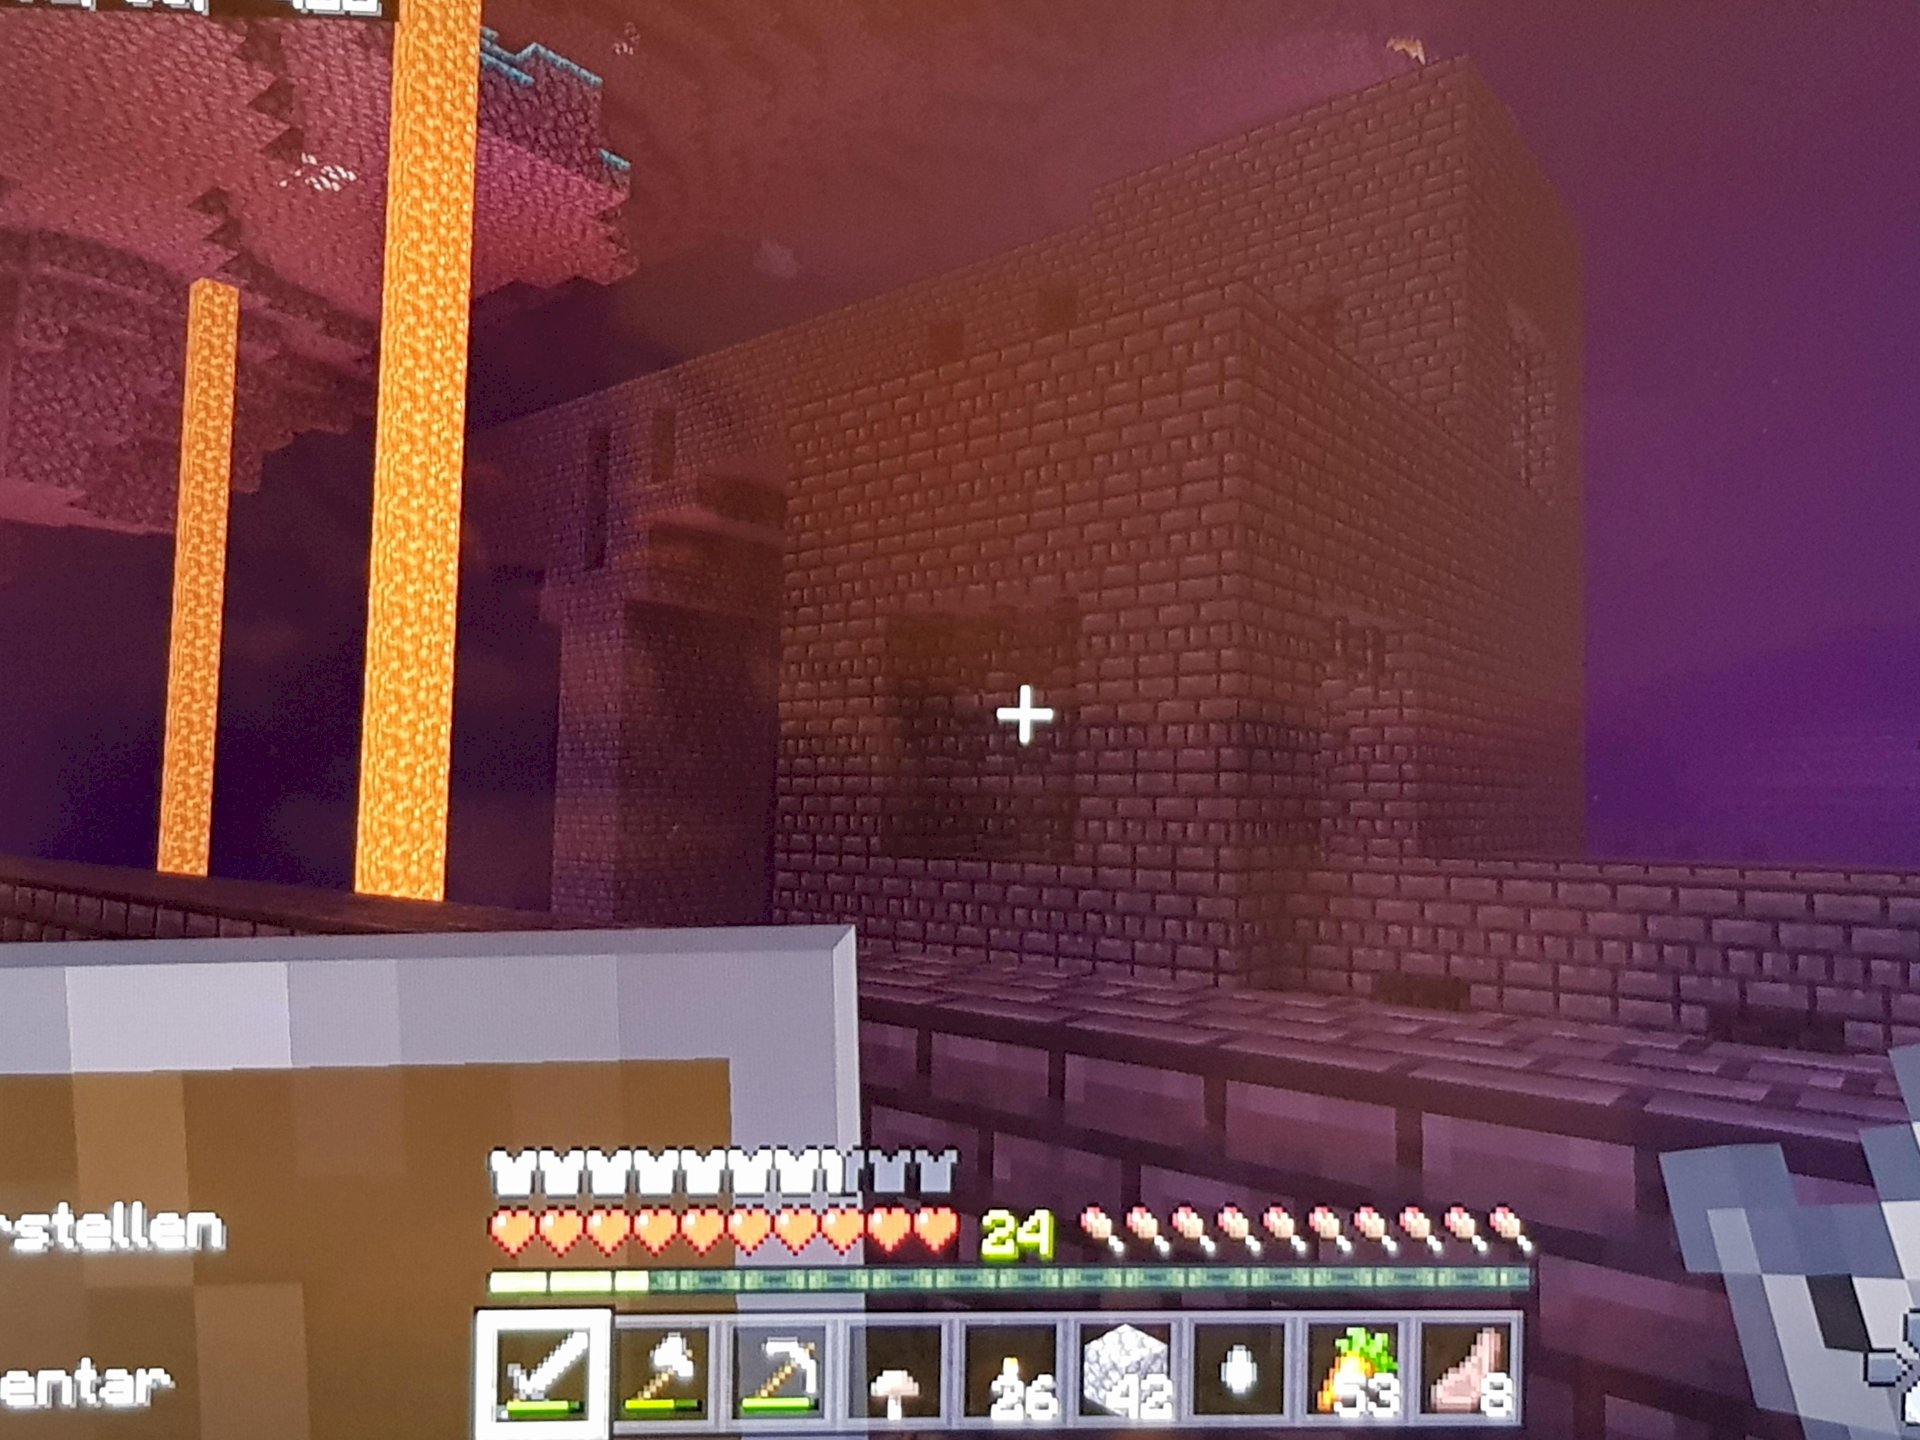 No nether warts in Nether Fortress Minecraft - 3